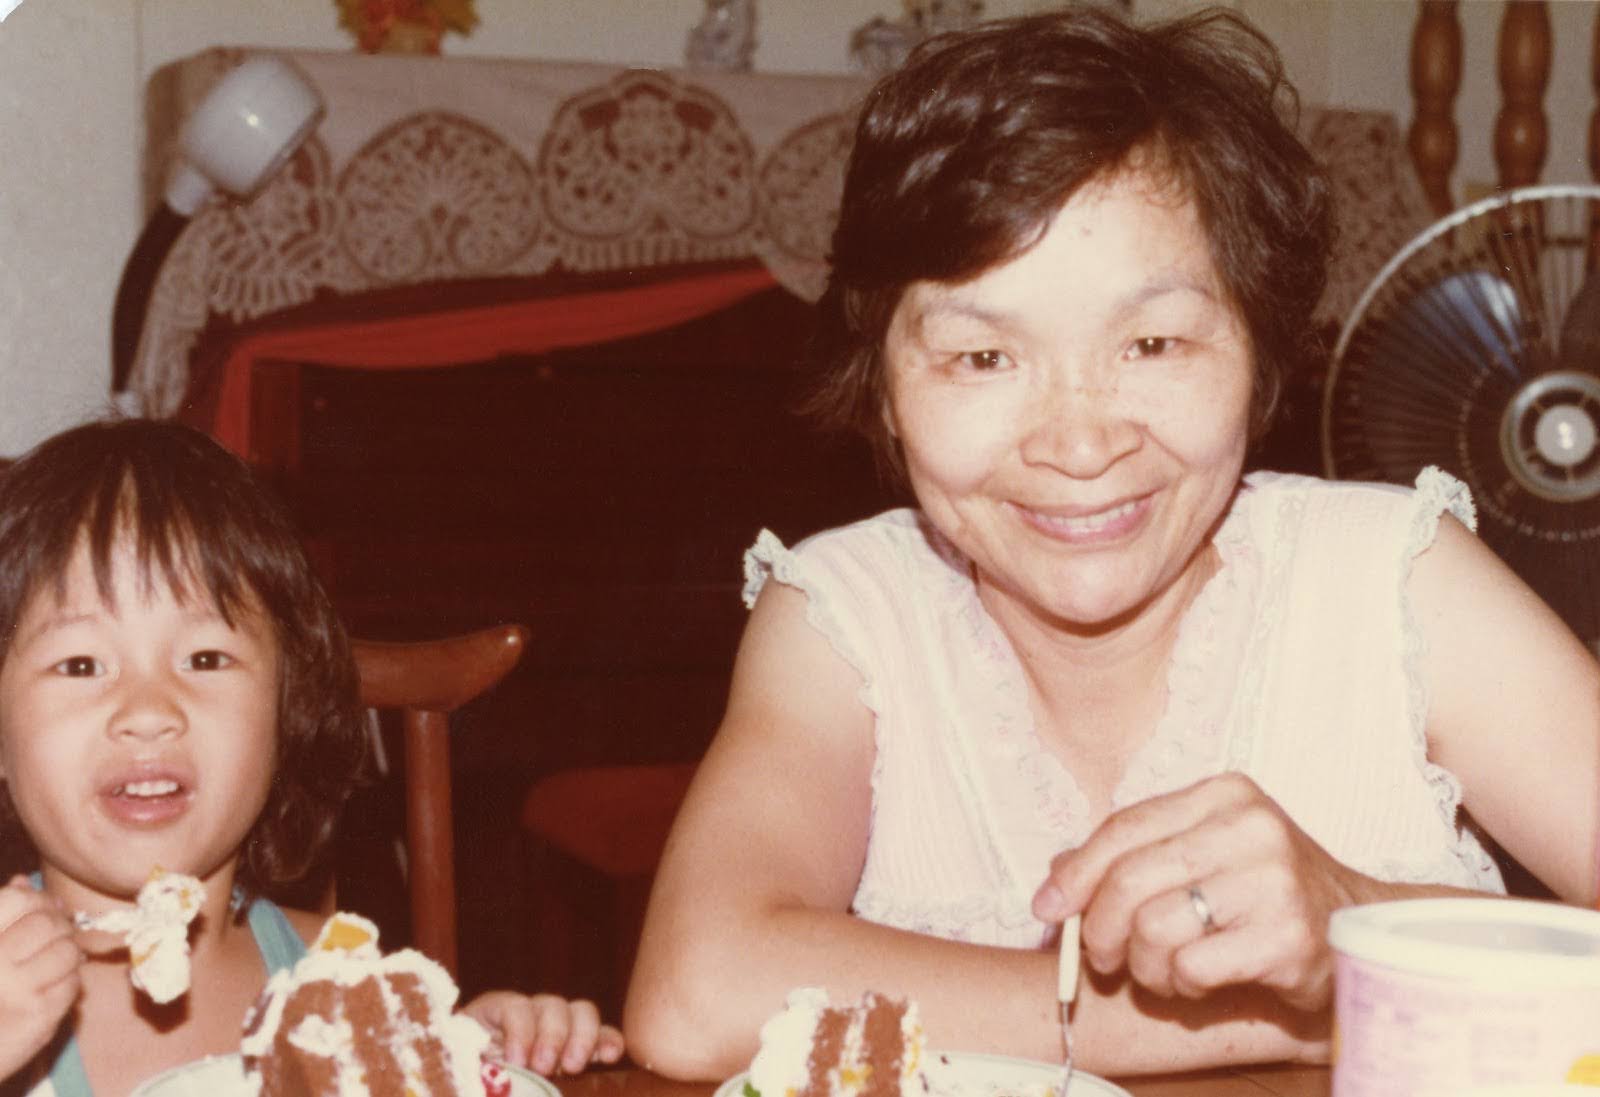 Image Description: Umi Hsu as a toddler eating cake next to Ahma wearing a white lacy tanktop. They are both smiling with forks of cake in hand. Behind them is a piano draped with cloth decoration. 